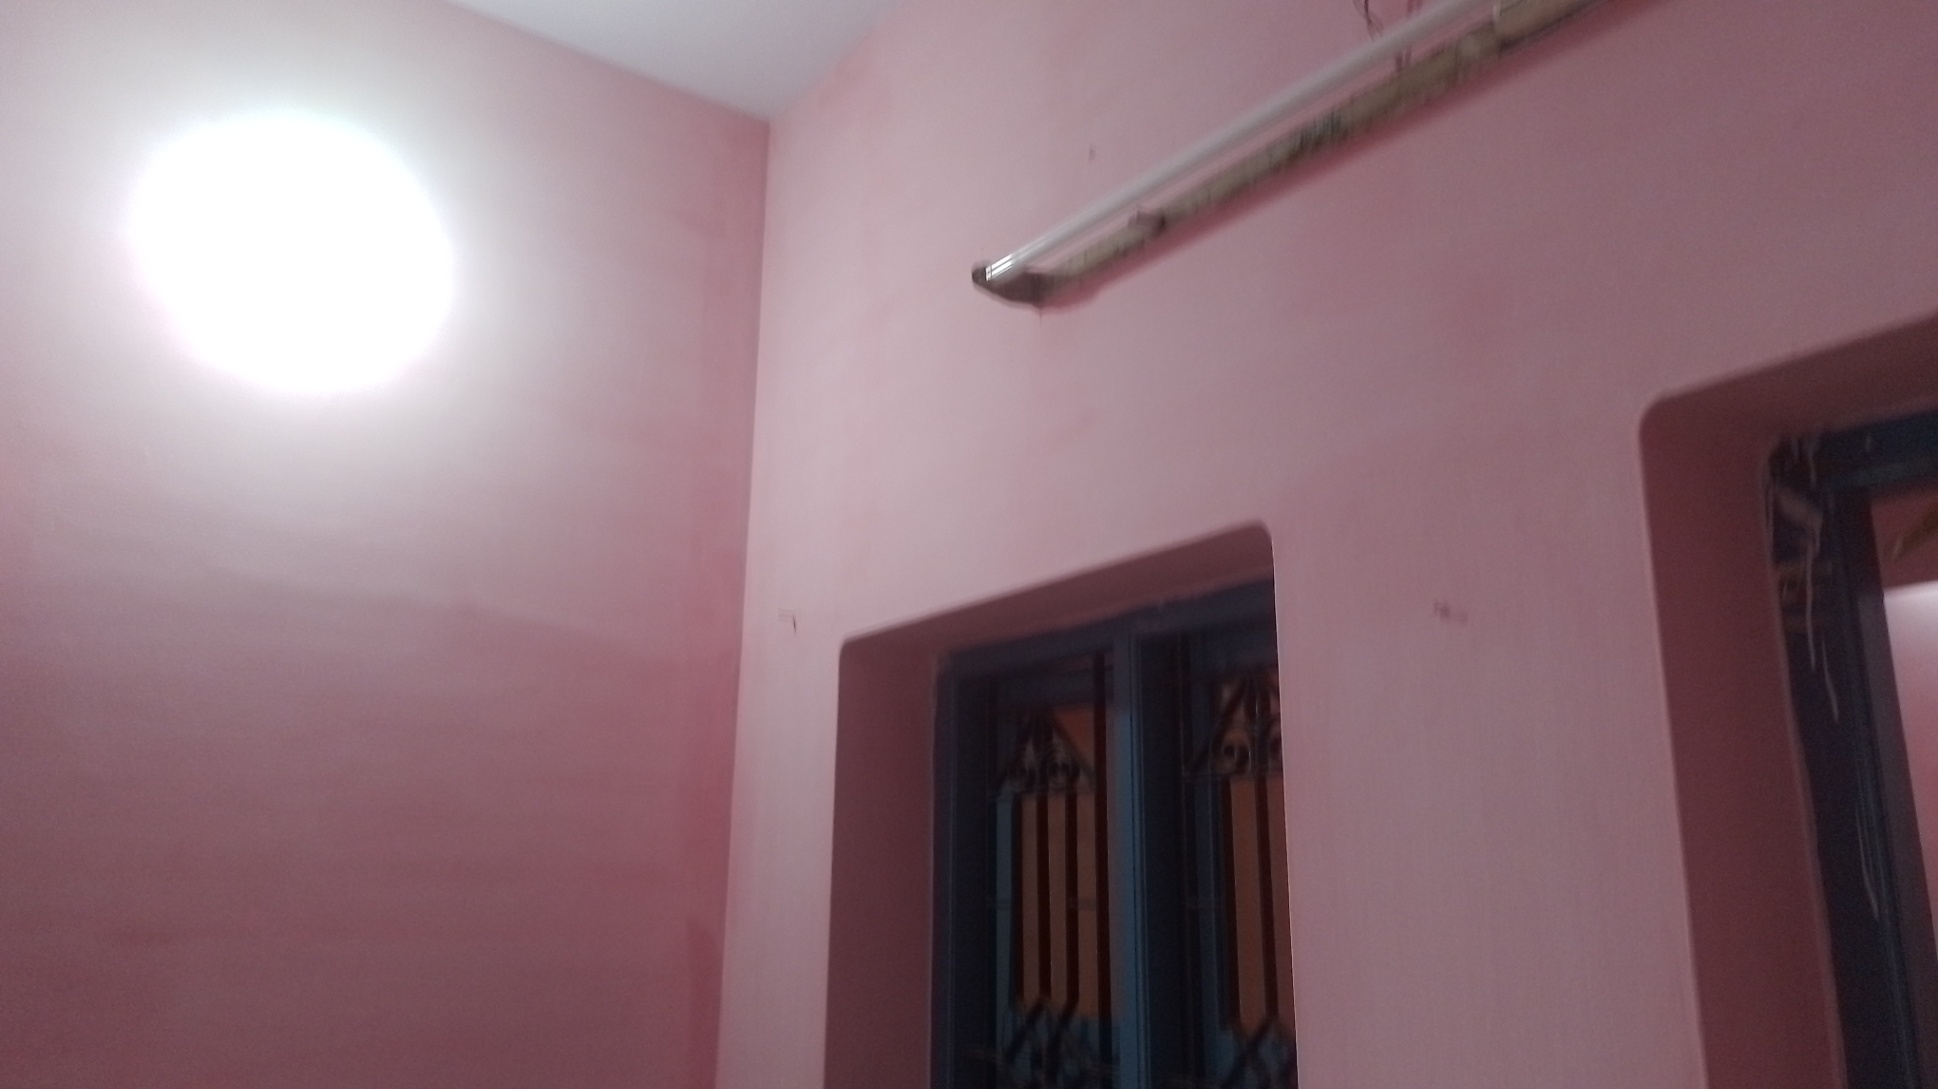 1 Bed/ 1 Bath Rent House/ Bungalow/ Villa; 900 sq. ft. carpet area, UnFurnished for rent @Aarapalyam